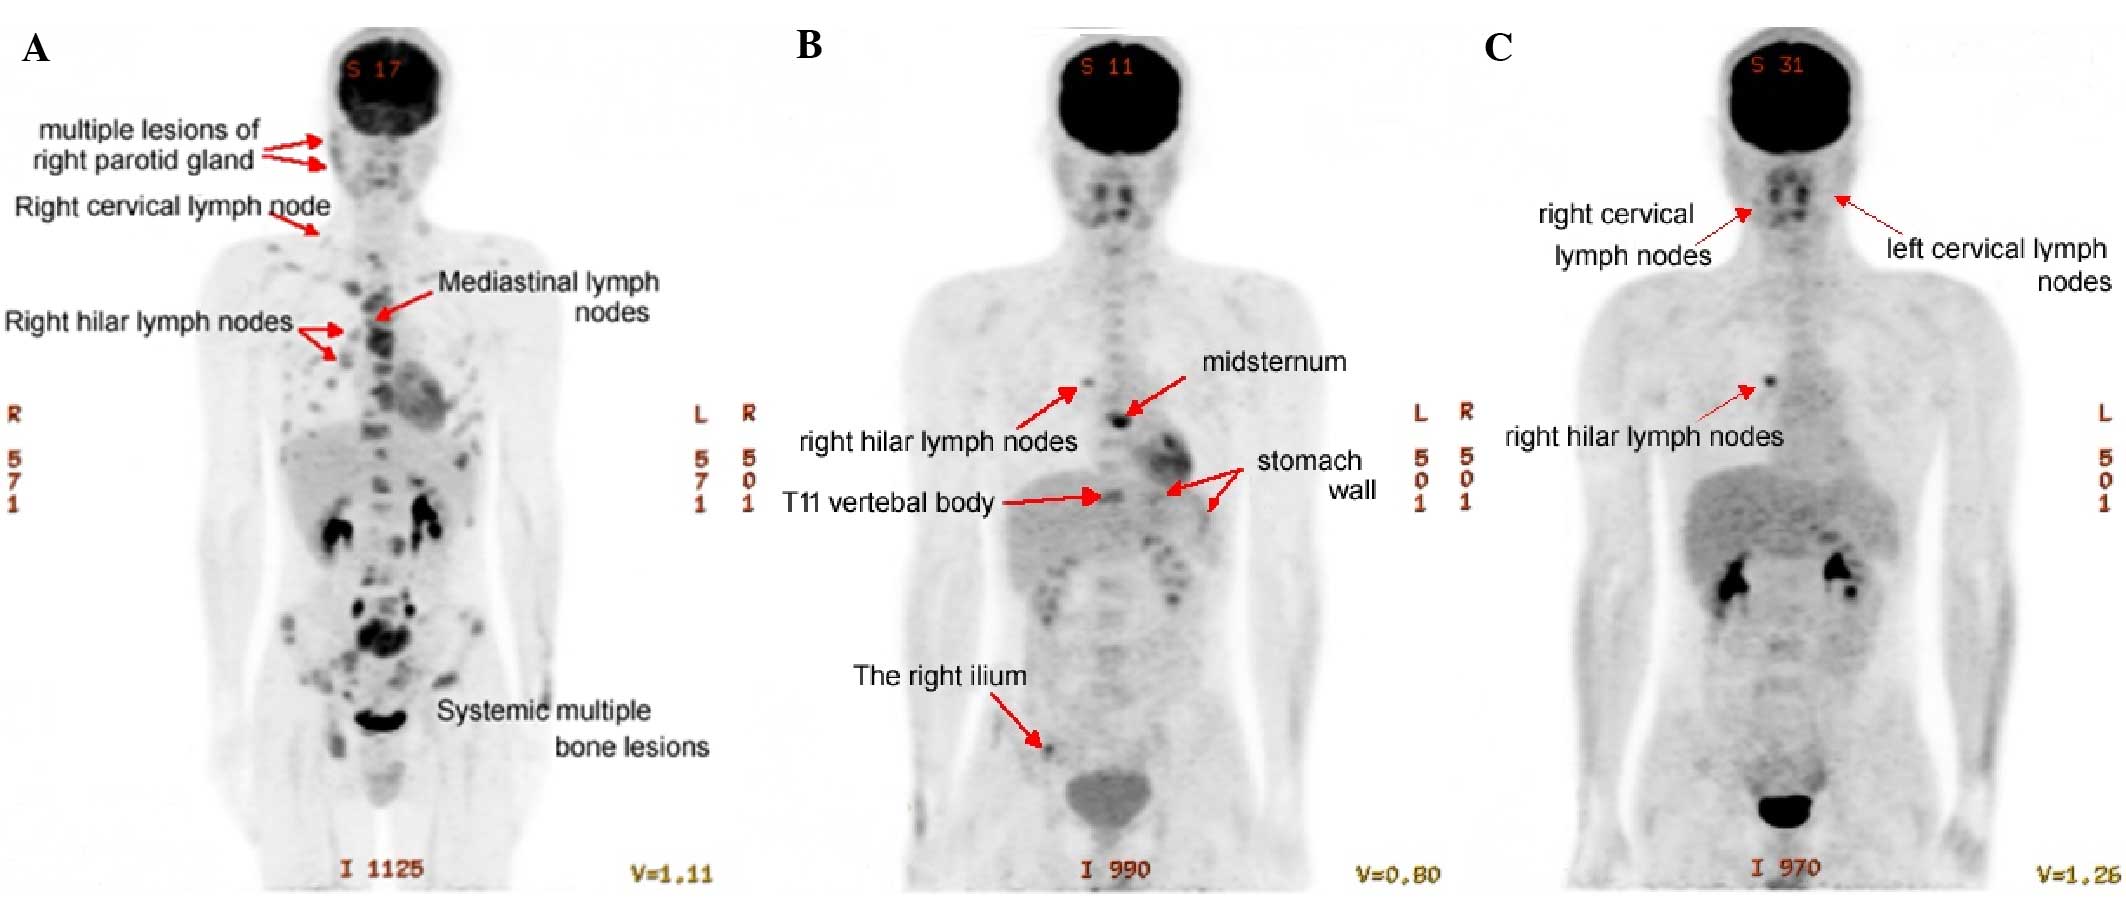 Primary Extranodal Head And Neck Classical Hodgkin Lymphoma A Rare